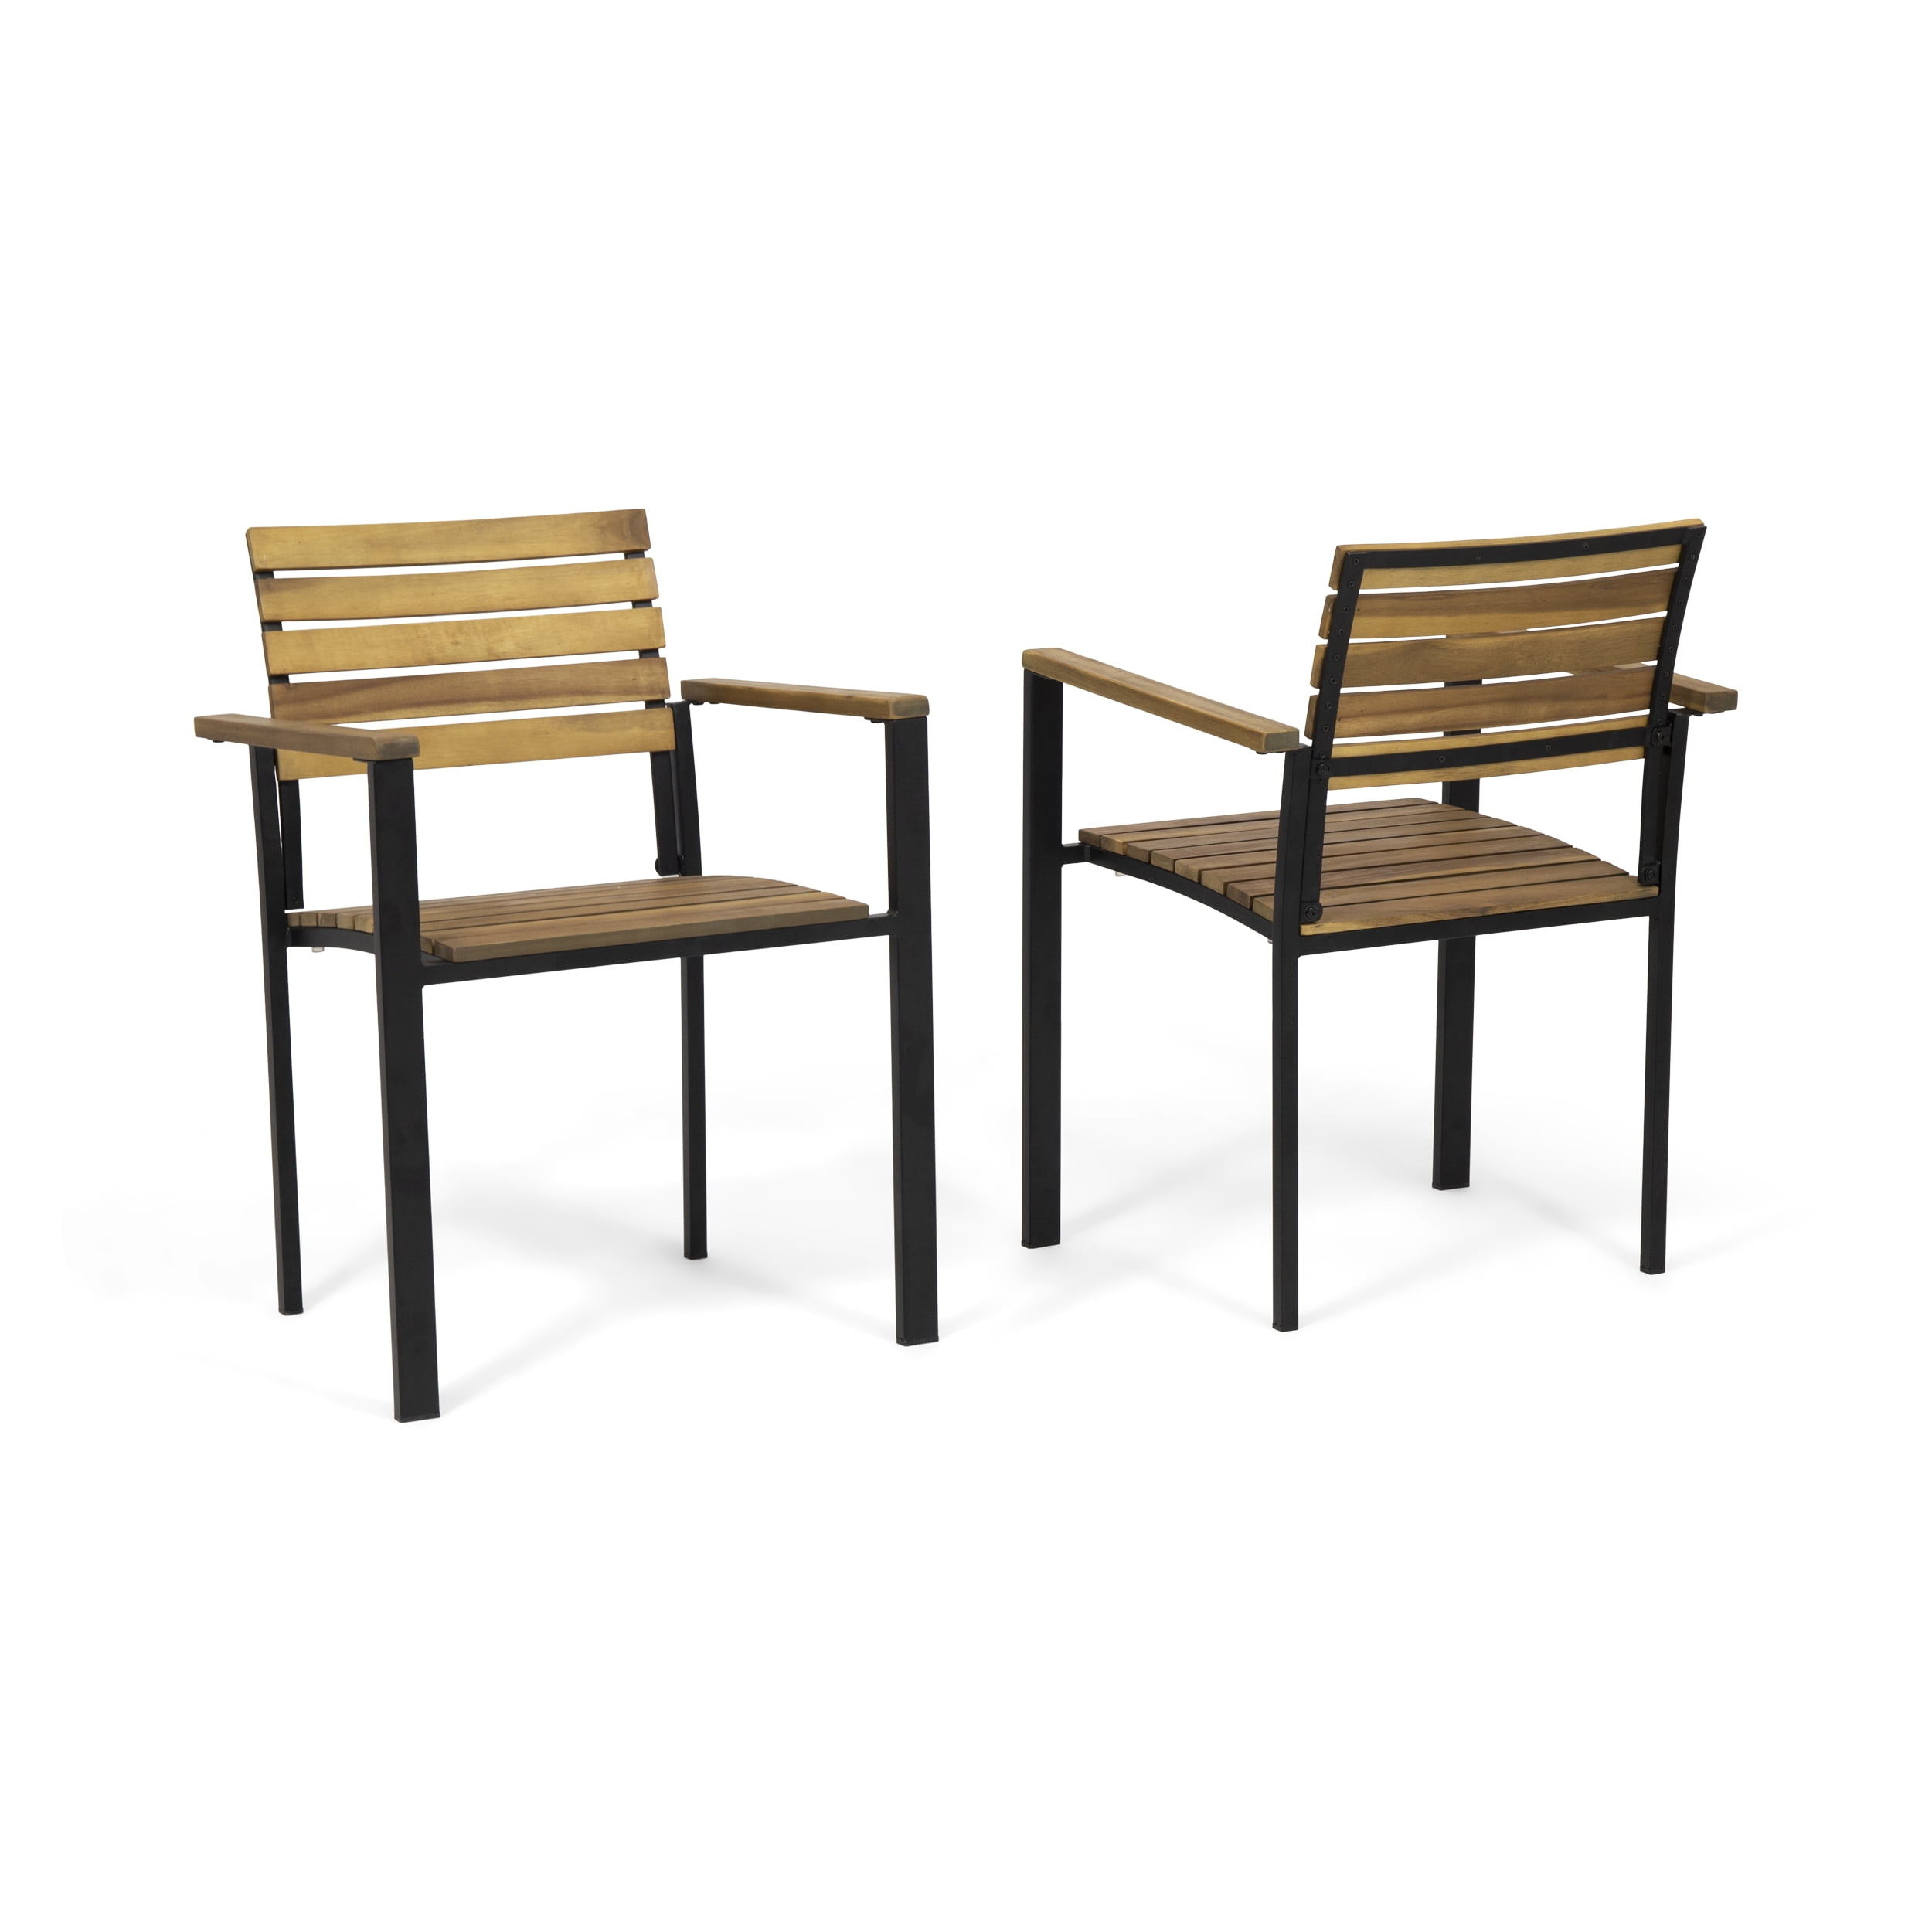 Gray and Black Set of 2 Great Deal Furniture Alberta Outdoor Wood and Iron Dining Chairs 